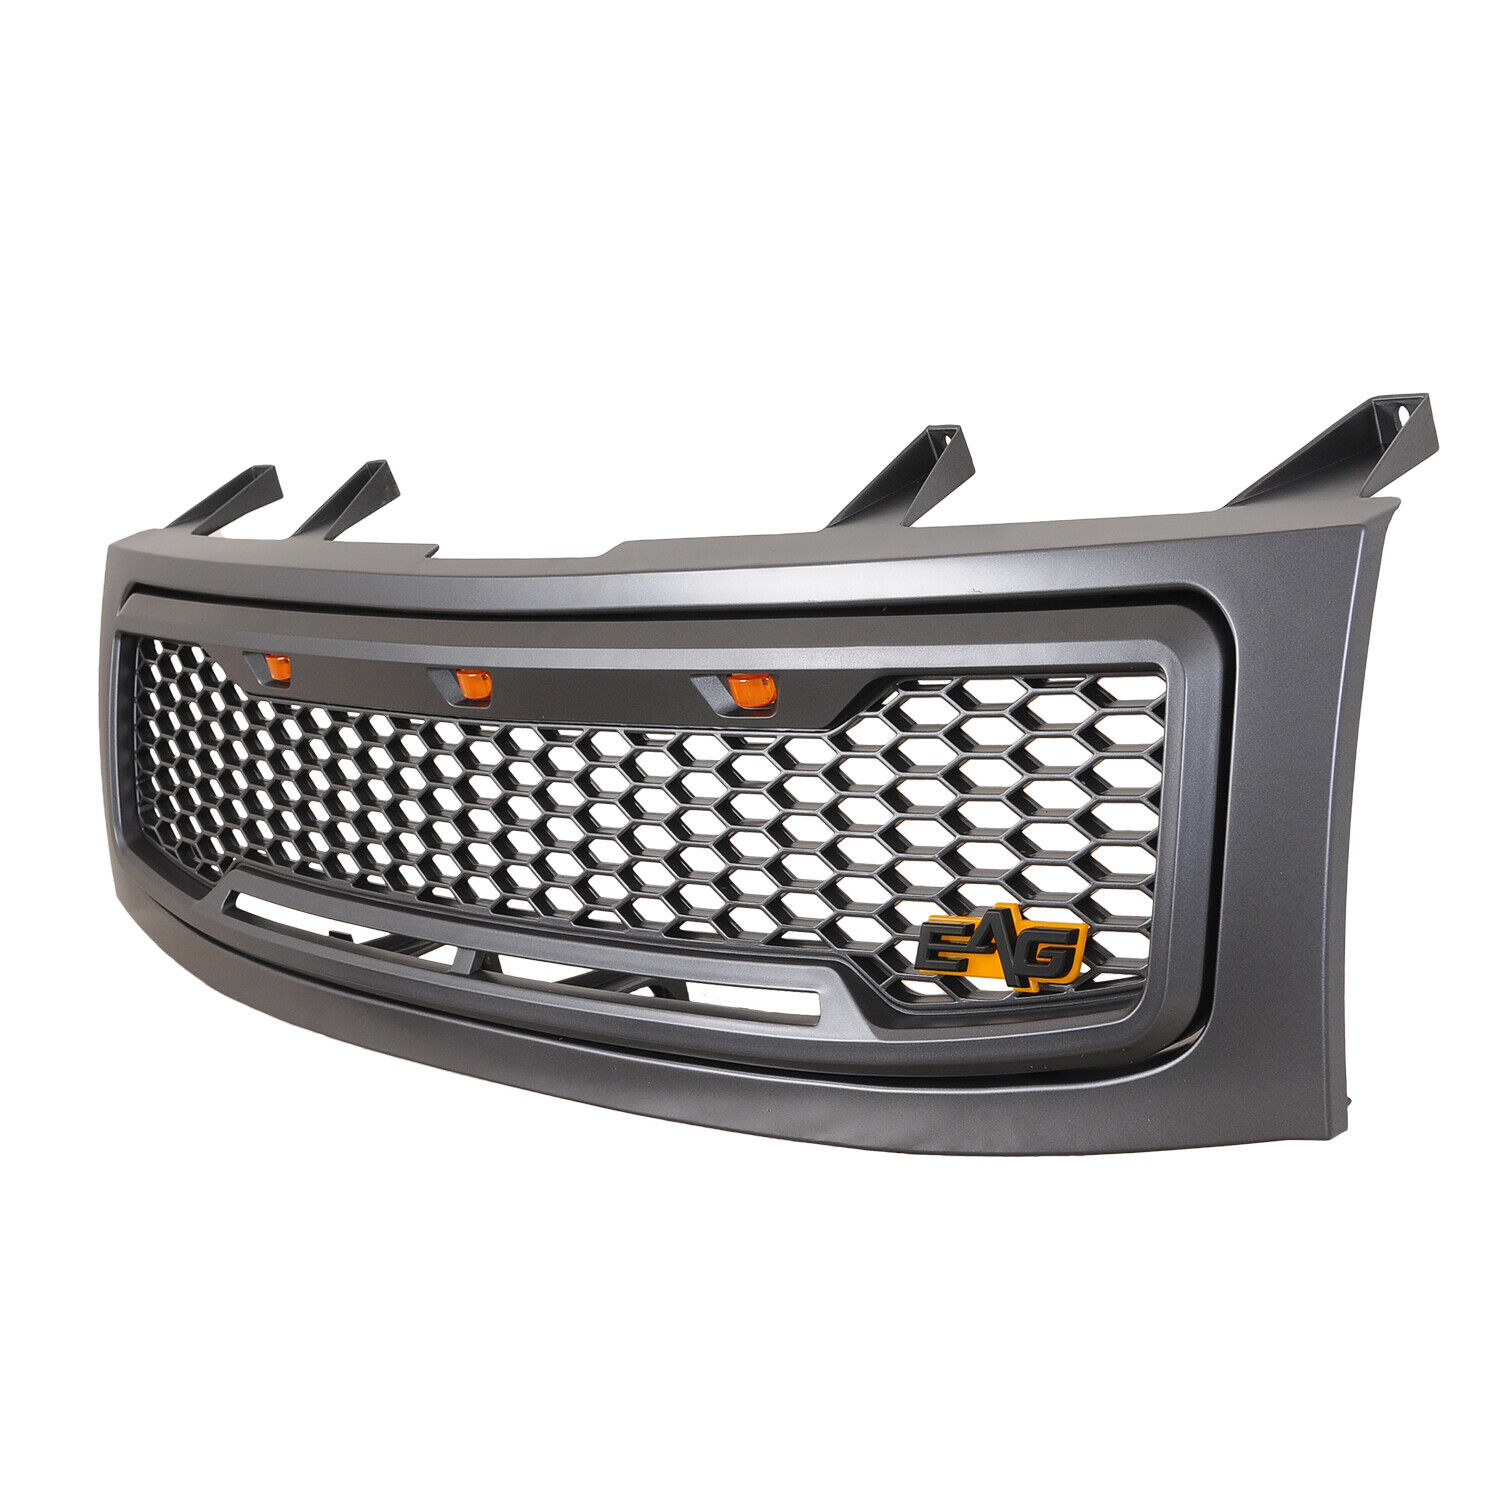 EAG Grill LED Grille Gray Upper Front Replacement Fit 04-07 Nissan Titan